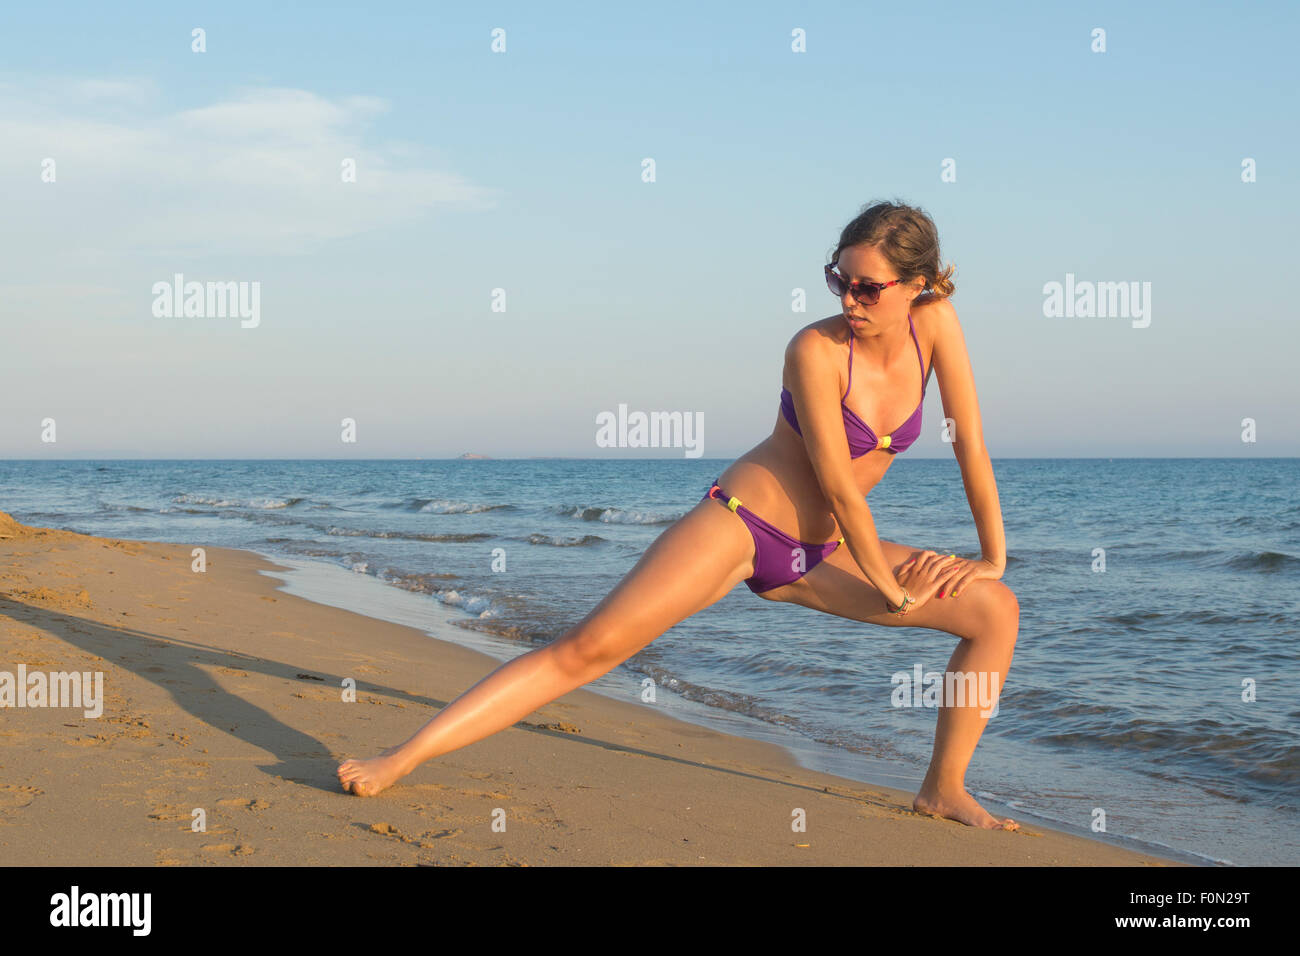 Young Girl Walking On The Beach In A Swimsuit 5884988 Stock Photo At  Vecteezy